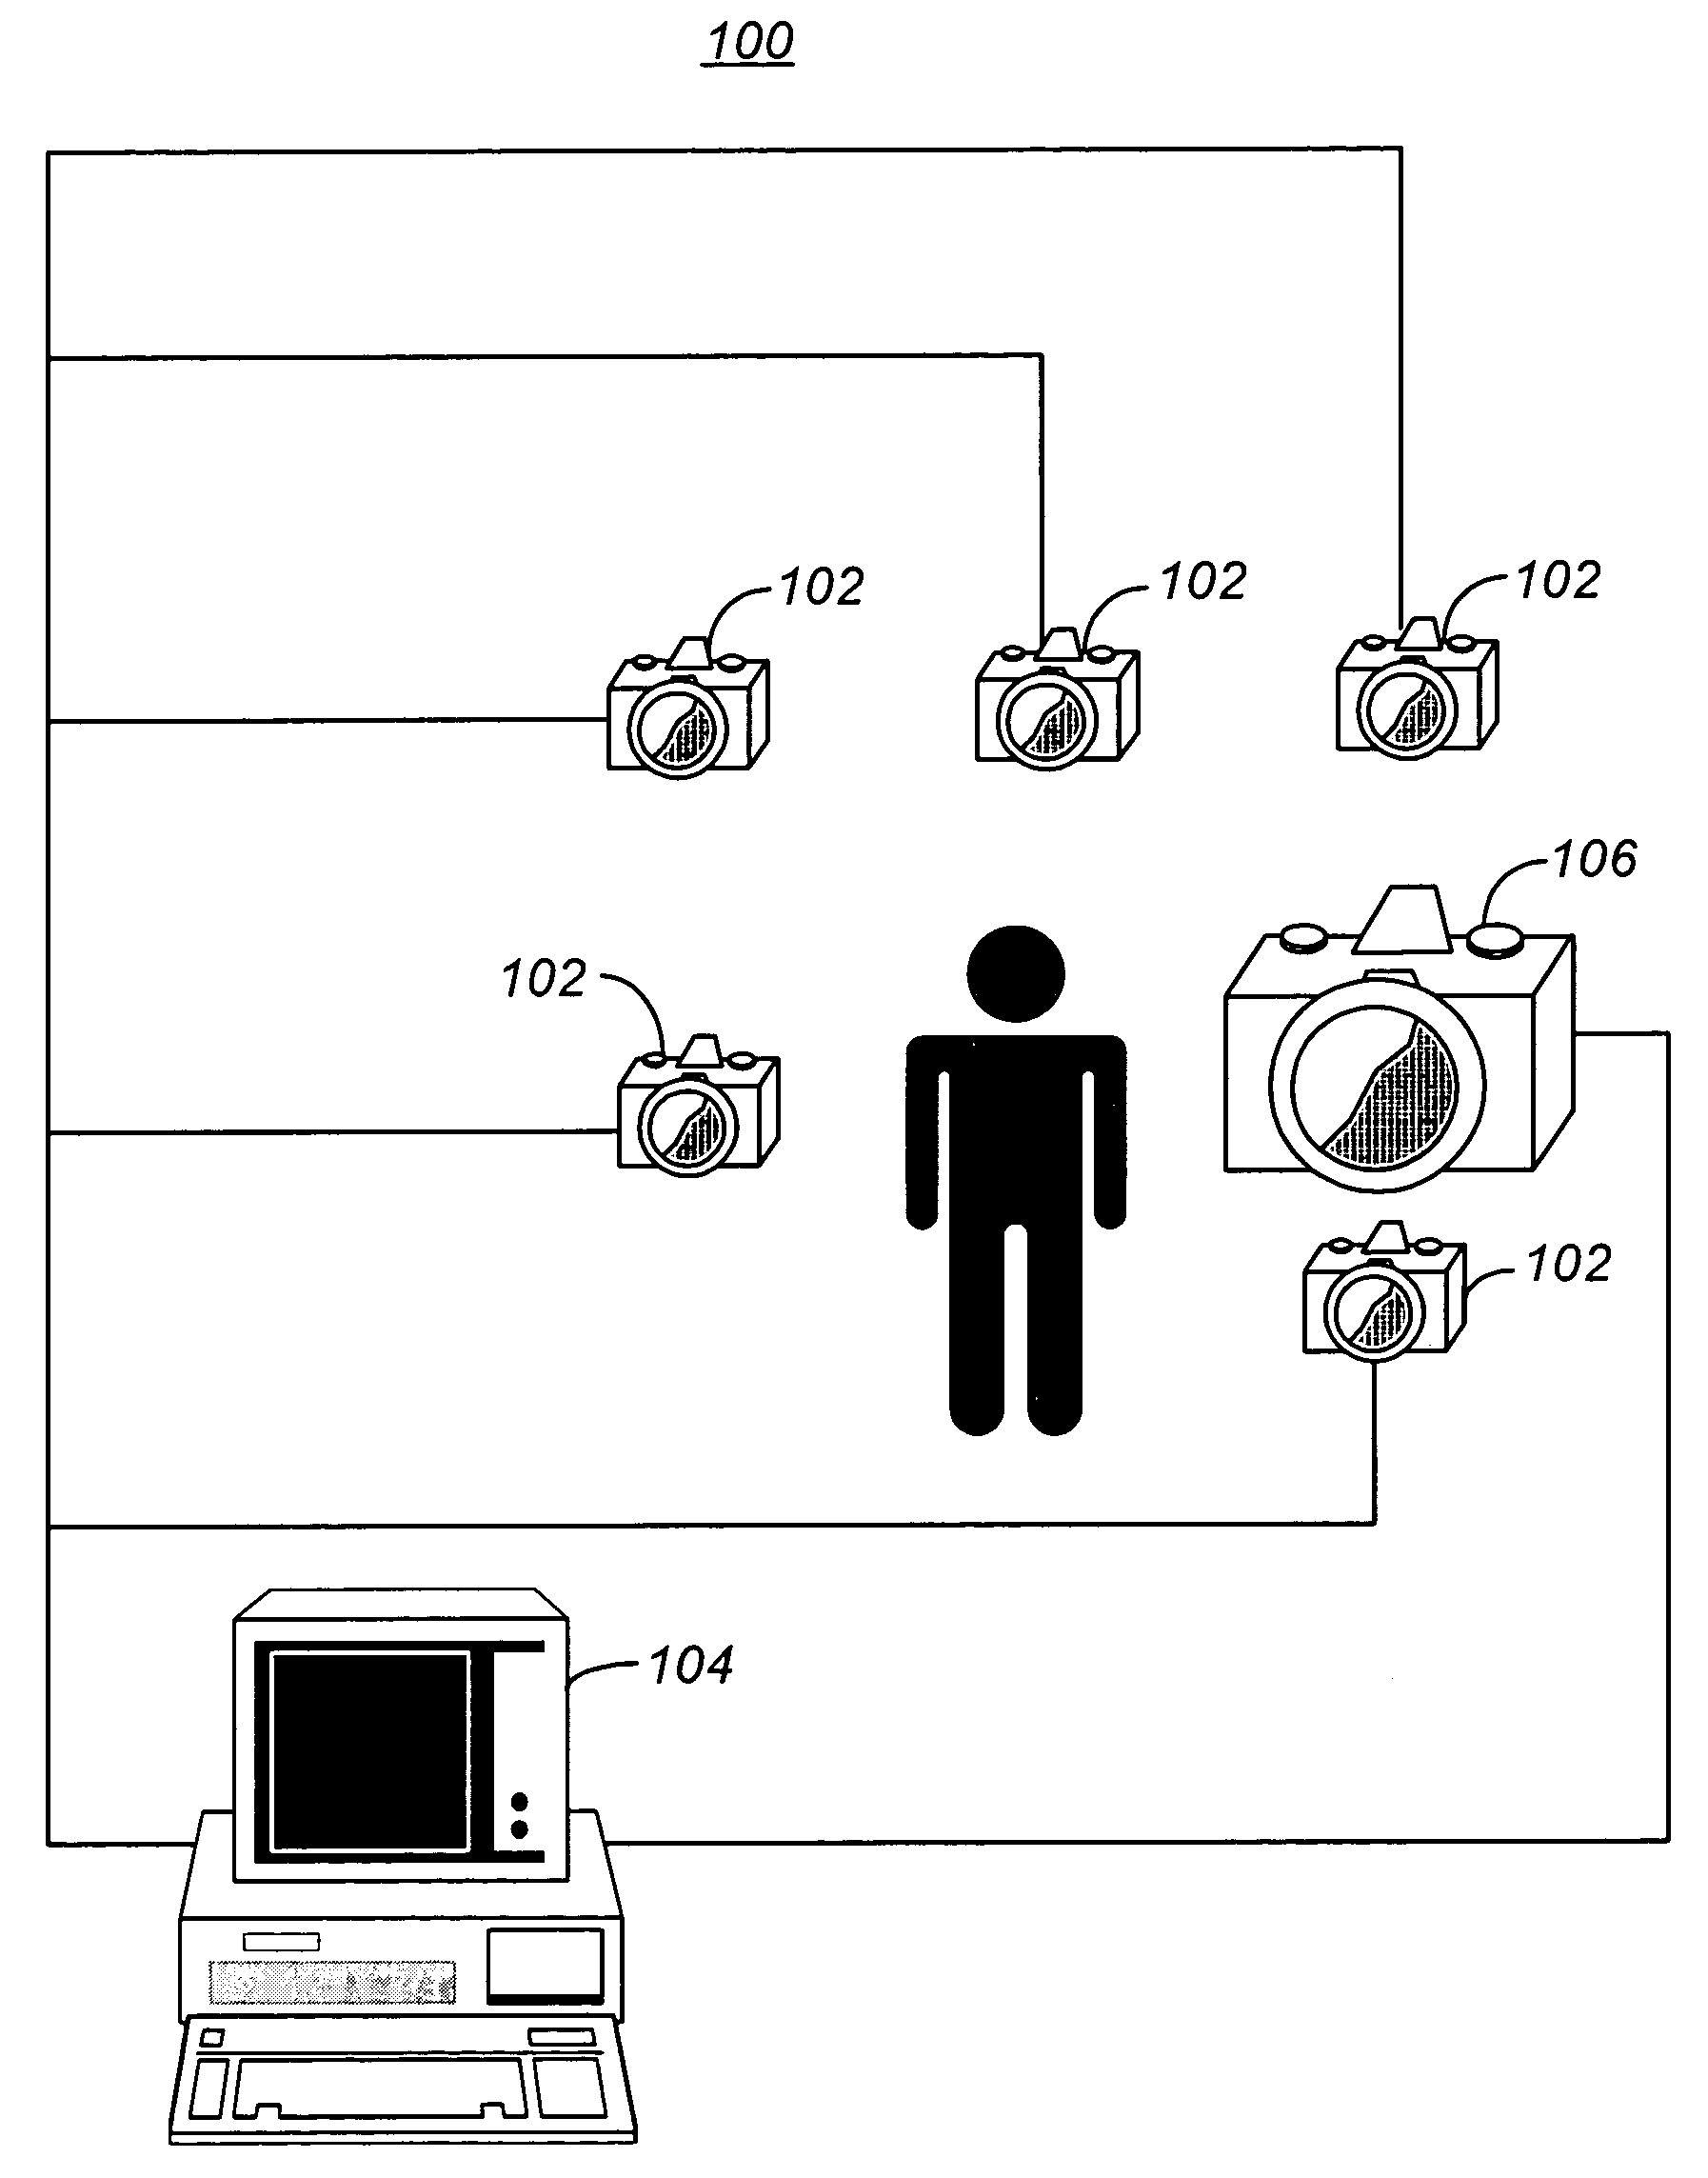 Method of indexing biological imaging data using a three-dimensional body representation